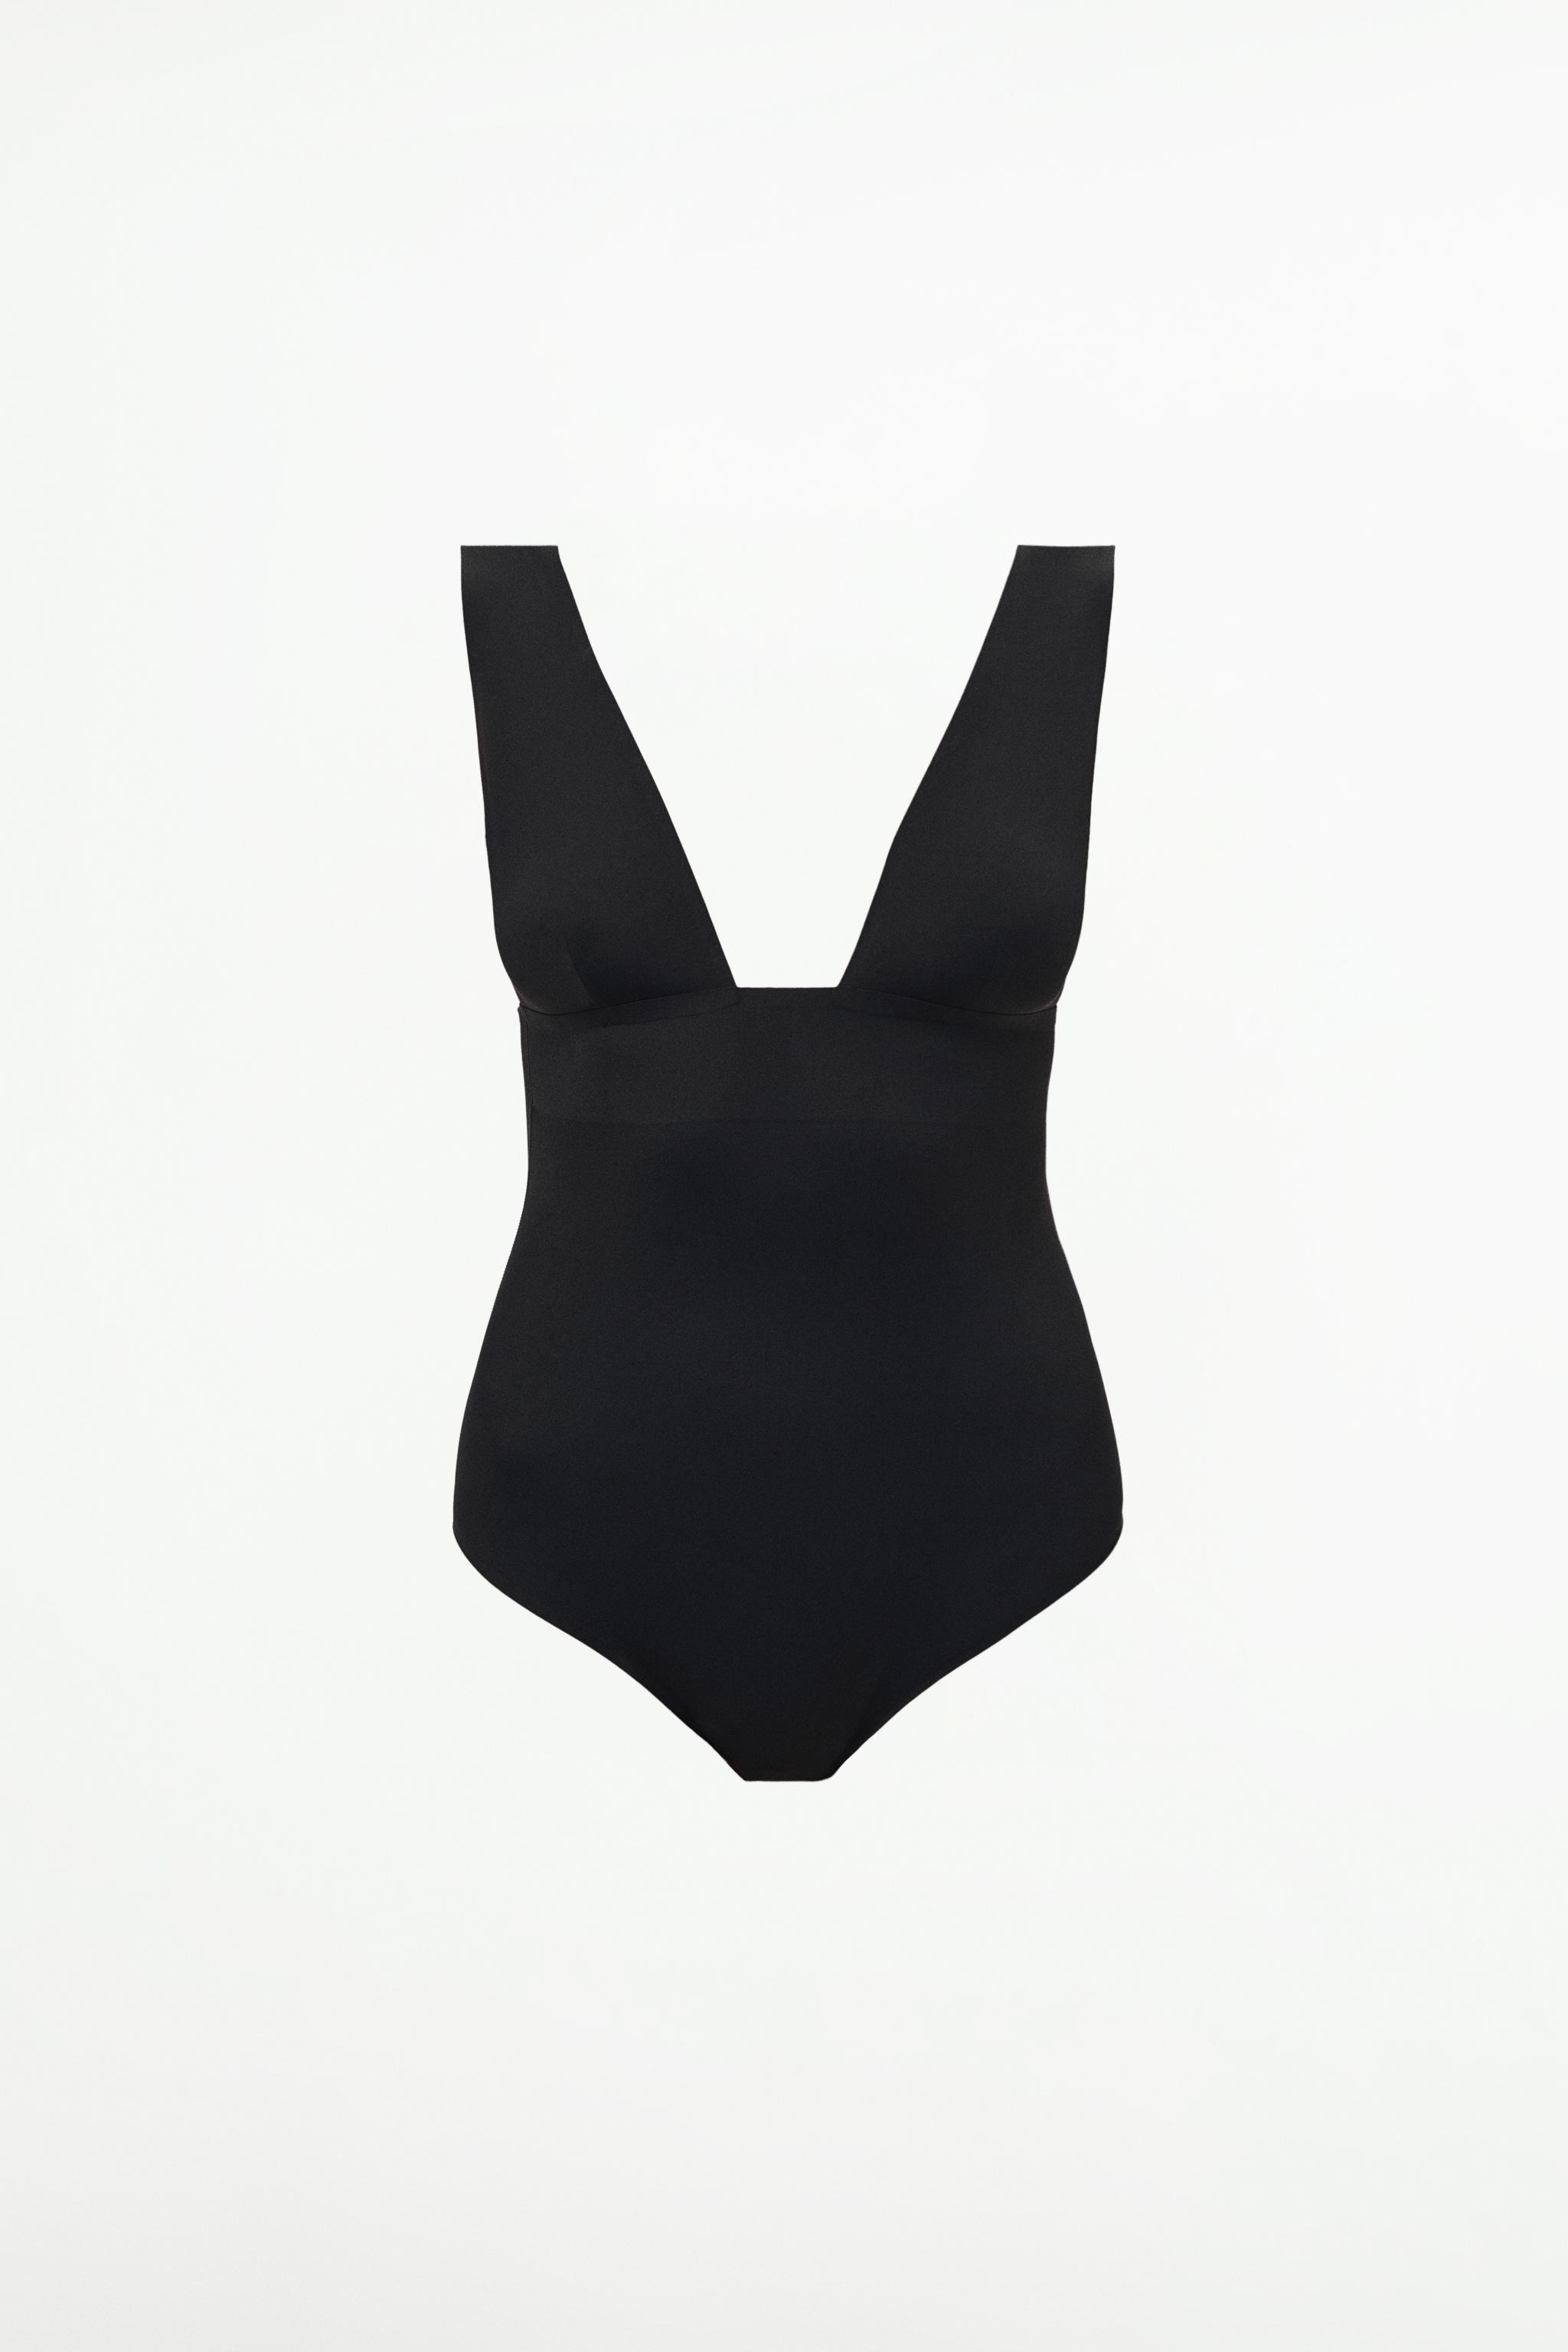 Colorful Black - Shapewear bodysuit with wide straps (201)